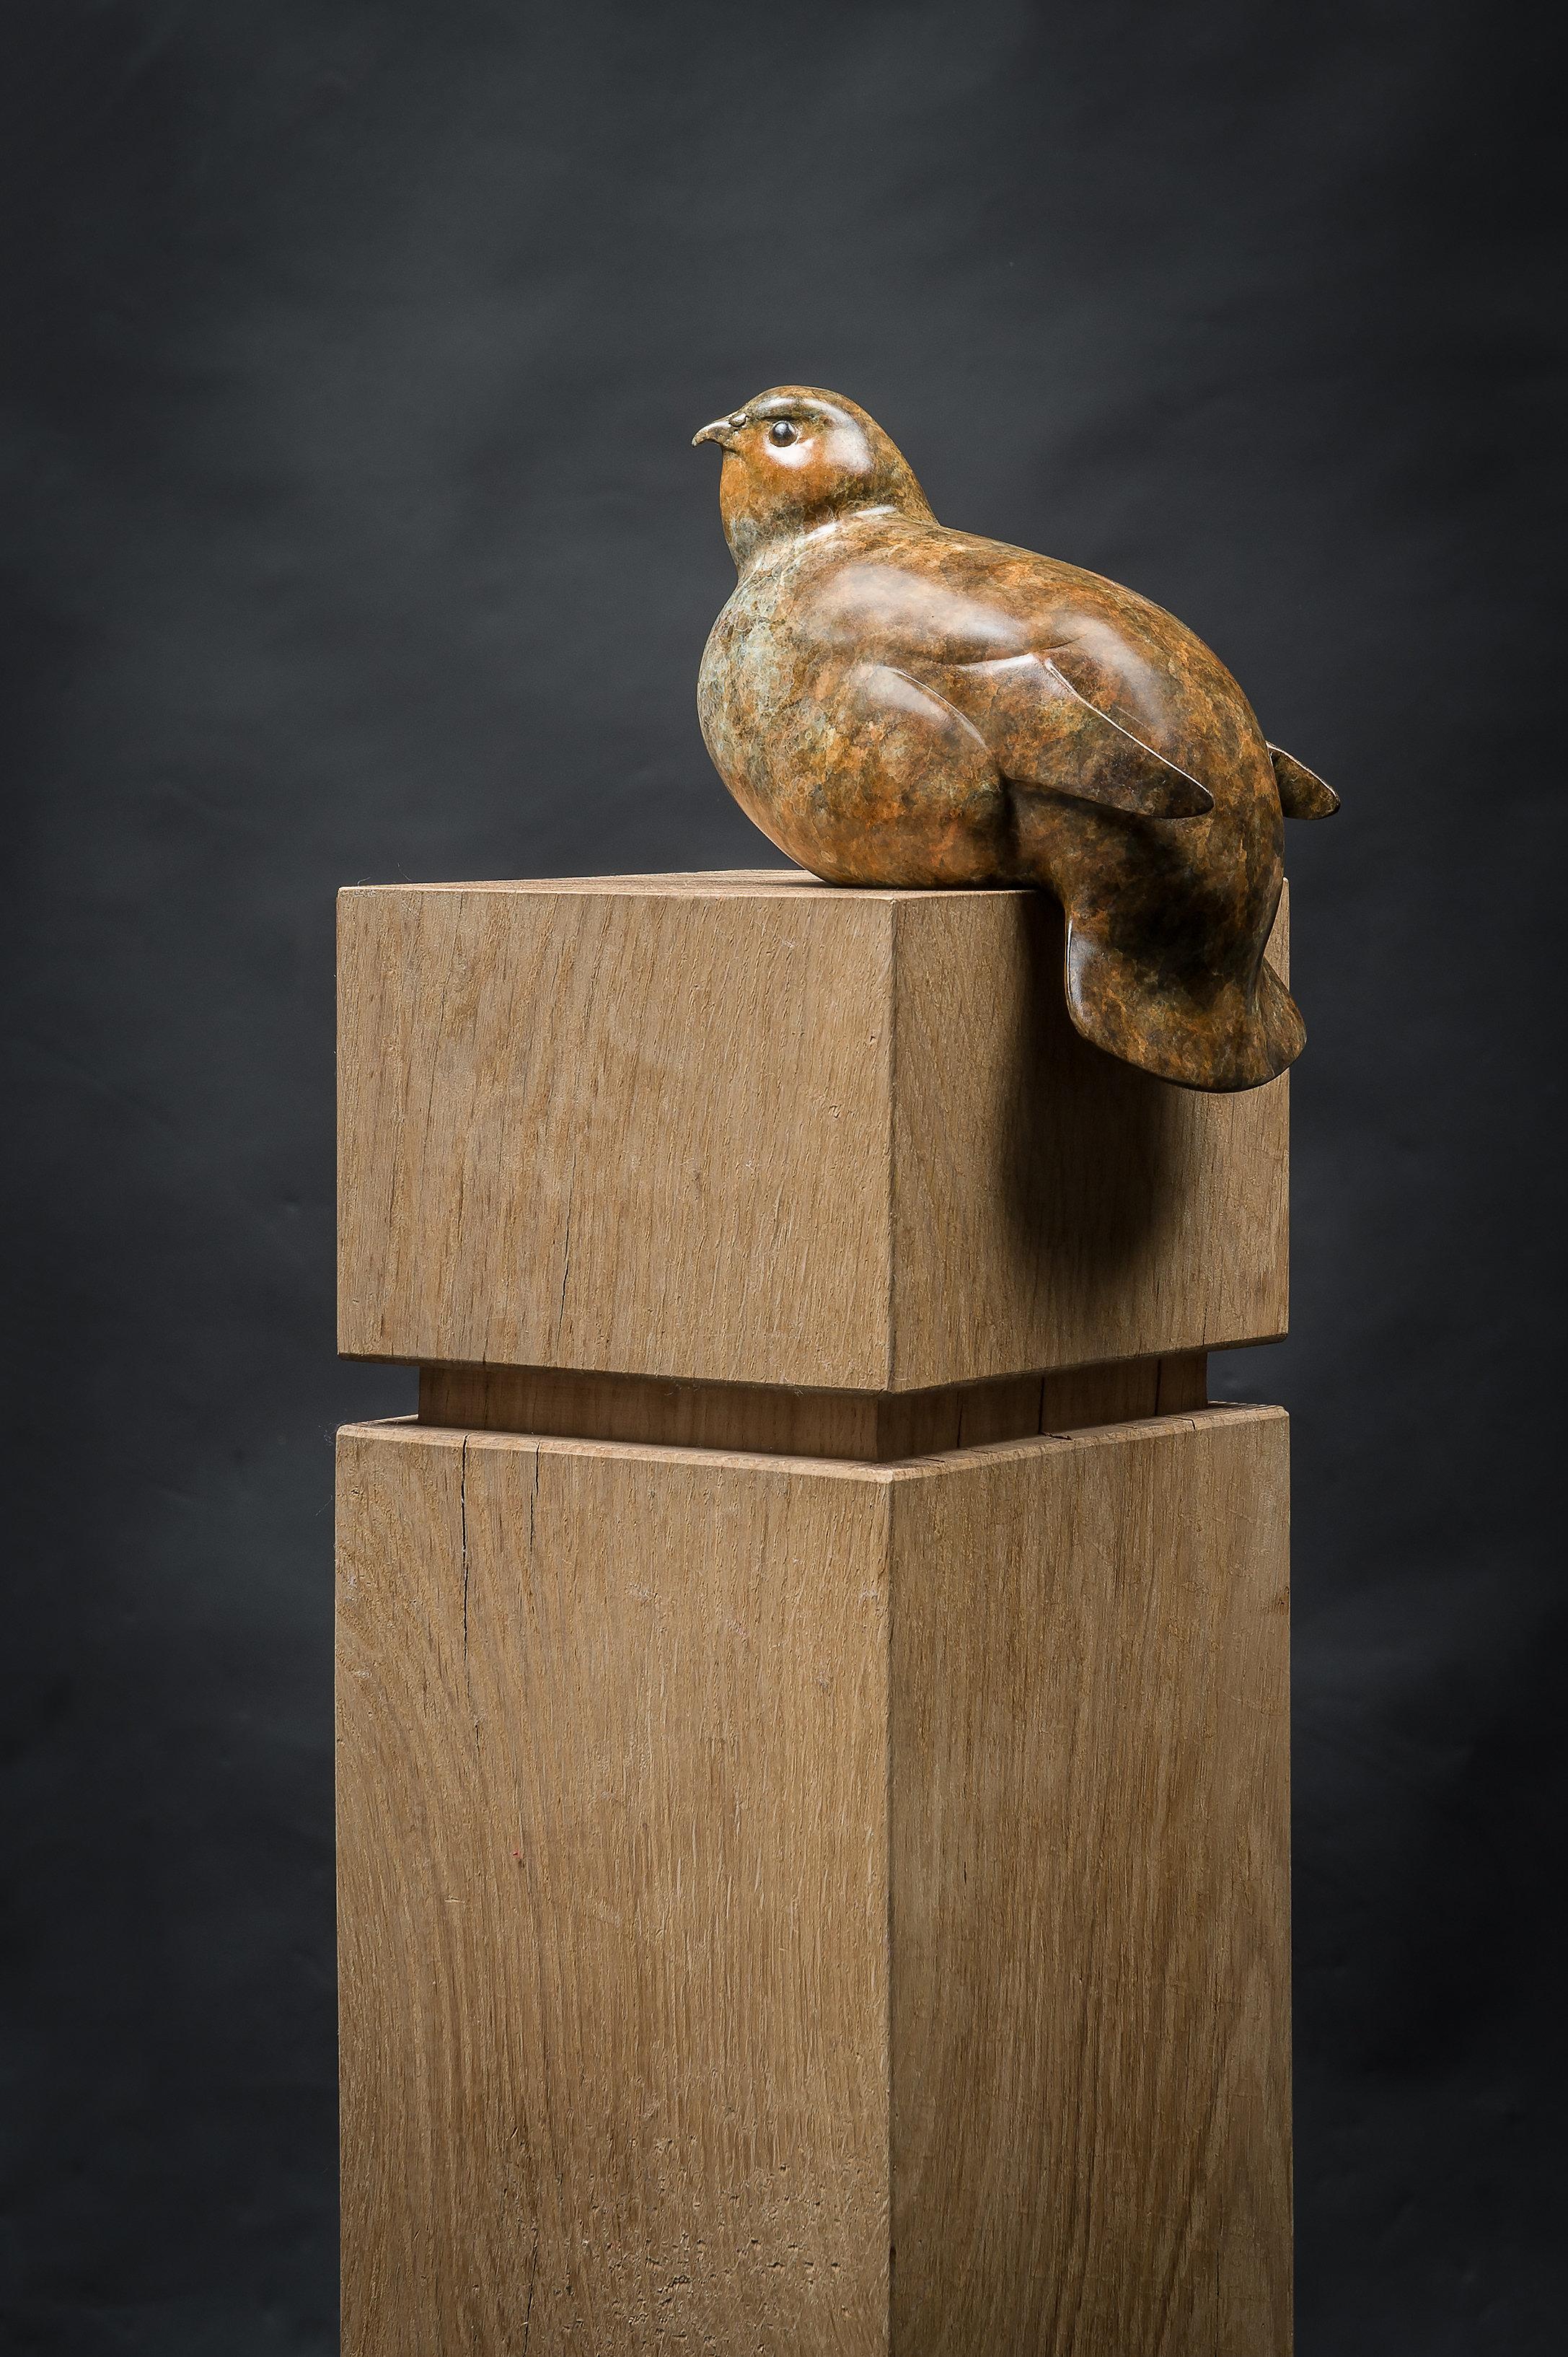 'Perching Partridge' is full of character! Richard Smith is a part-time sculptor and a part-time gamekeeper, who surrounds himself with wildlife on a daily basis. His love and knowledge of the animals he sculpts is evident. This solid bronze